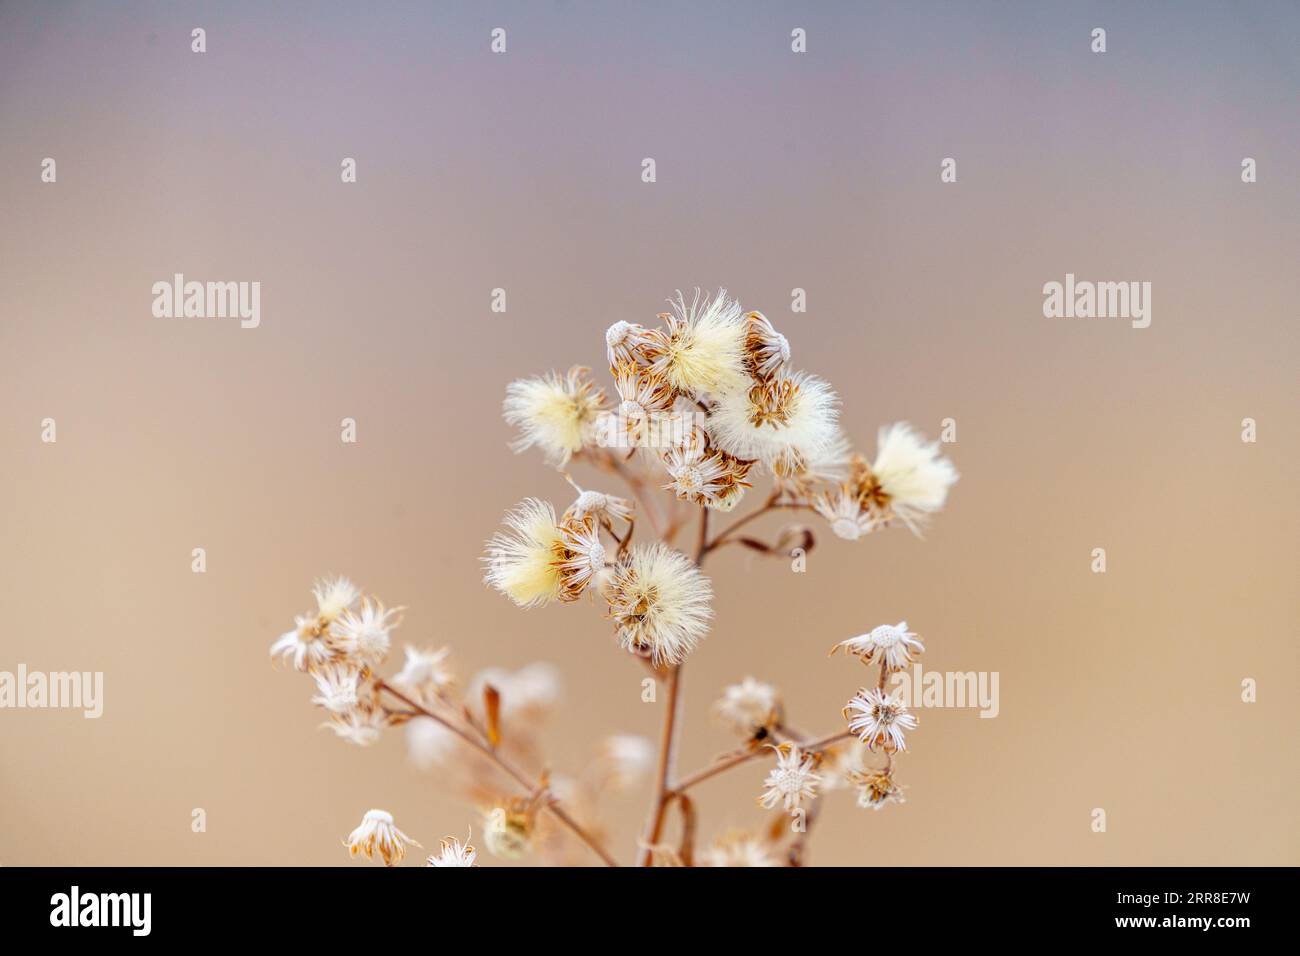 A set of delicate white flowers with creamy petals are illuminated against a soft, blurred background created by a bright, sunny day Stock Photo